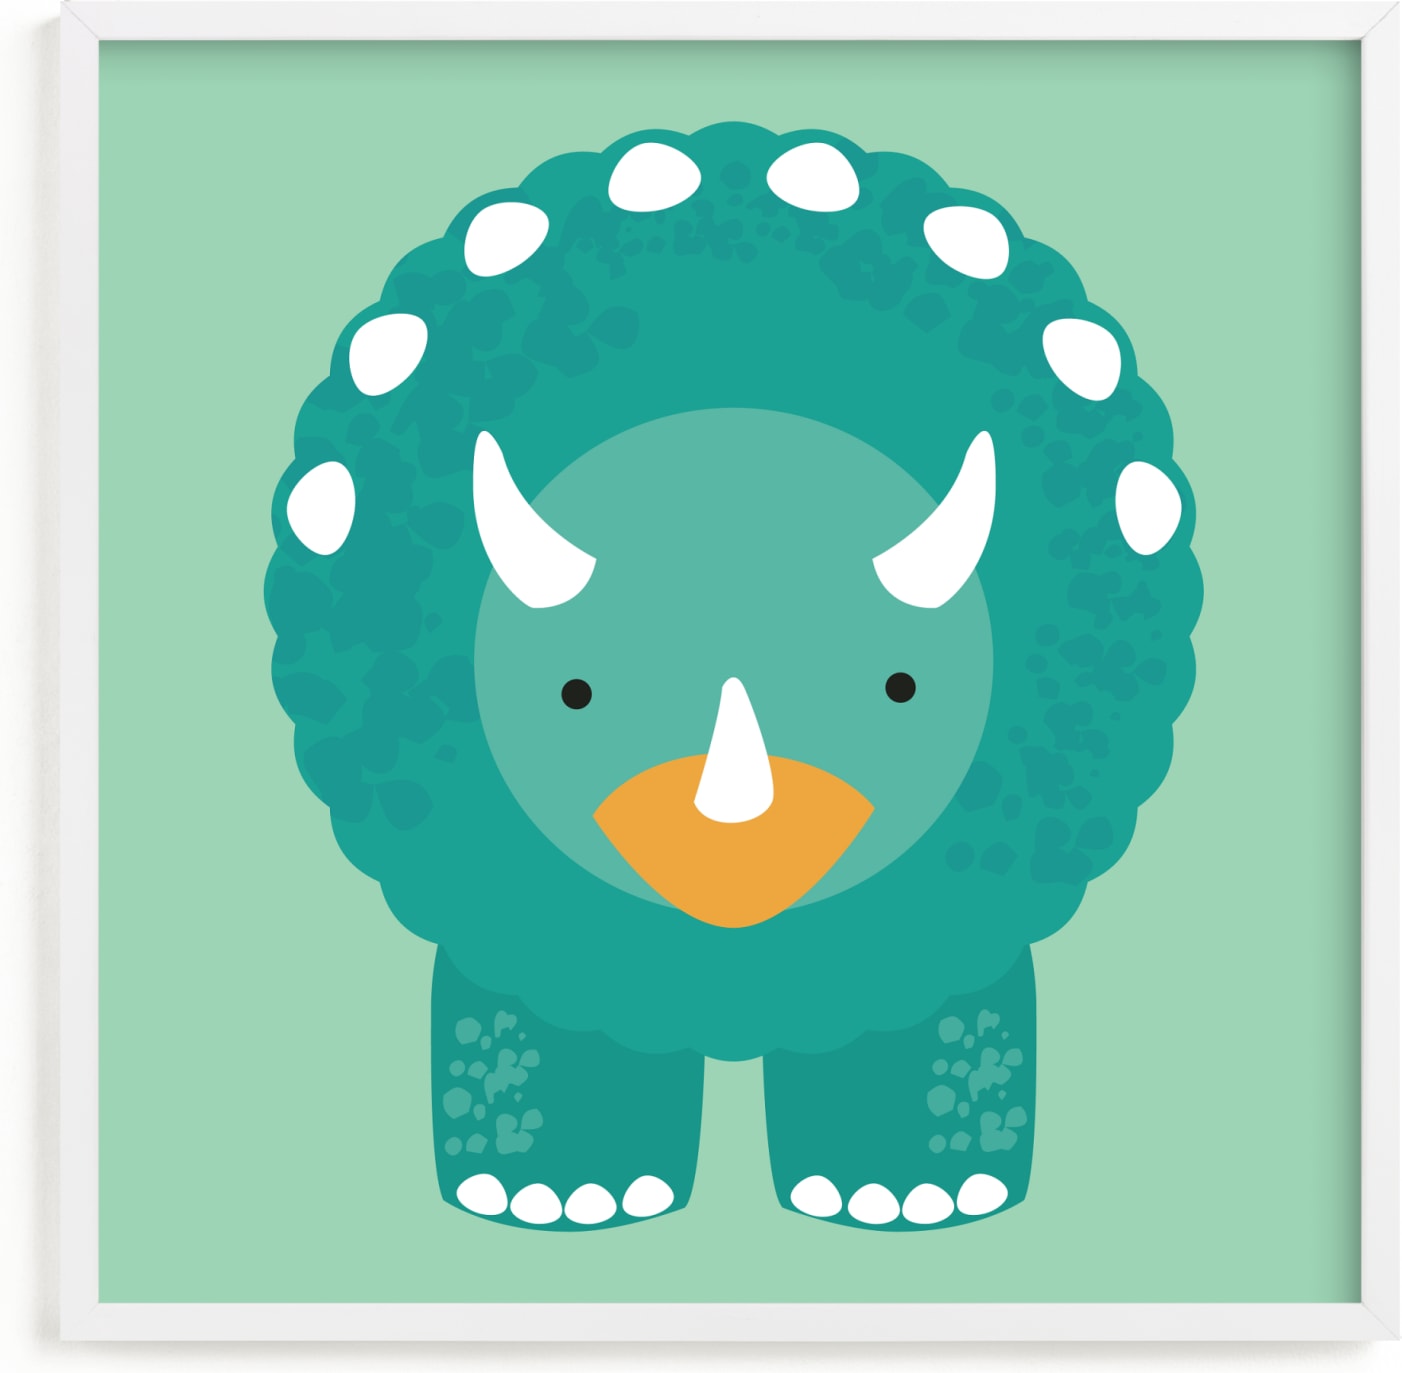 This is a green kids wall art by Itsy Belle Studio called Lil Dinosaur 1.